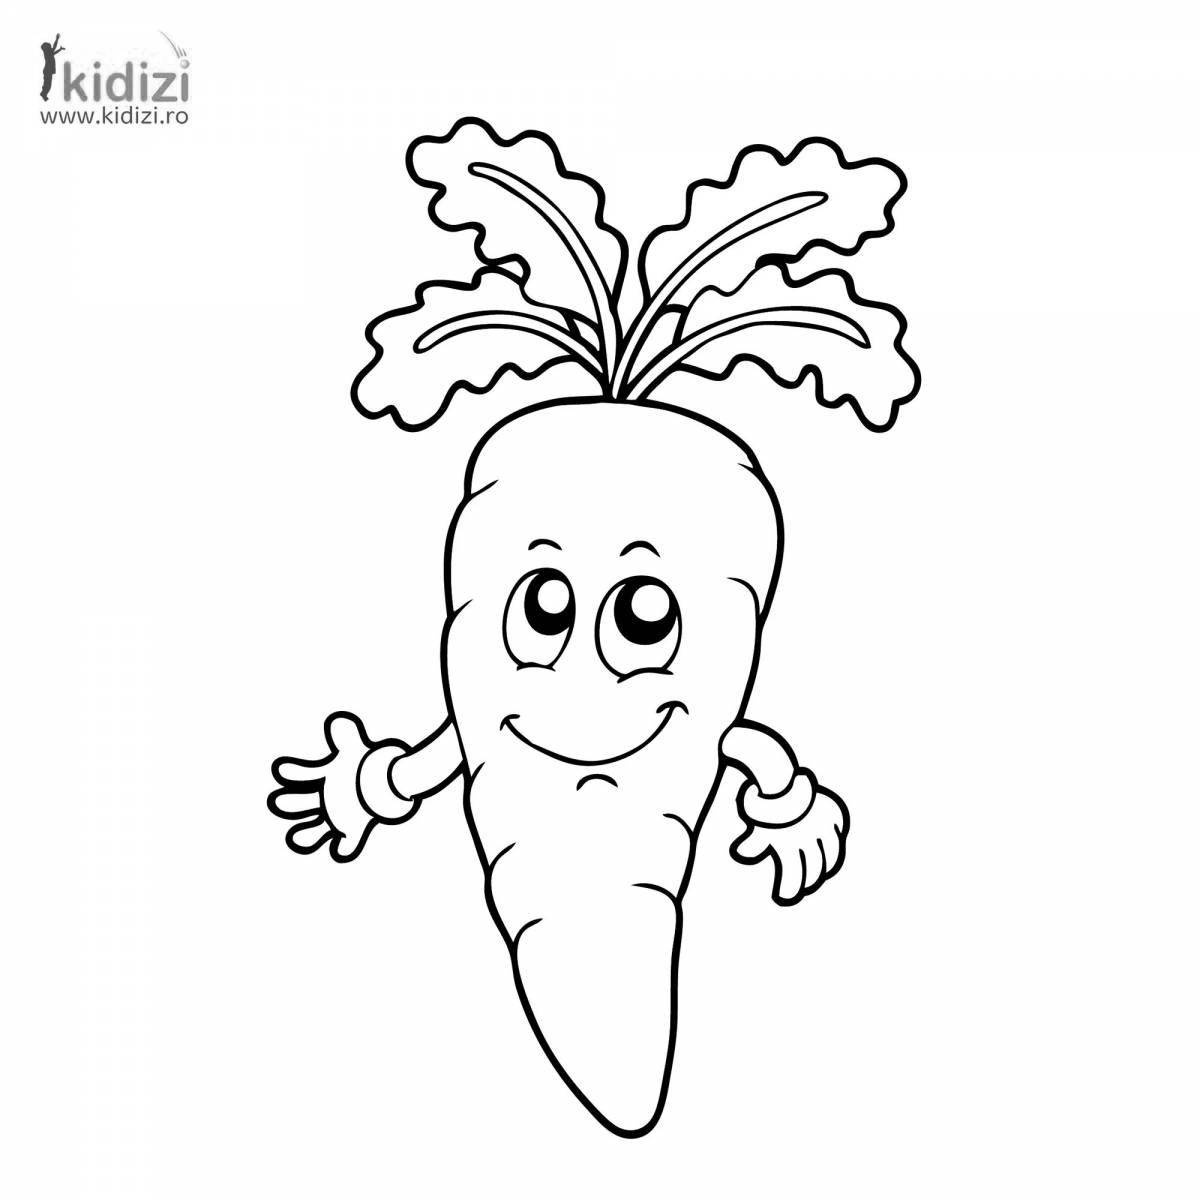 Cute carrot pattern coloring page